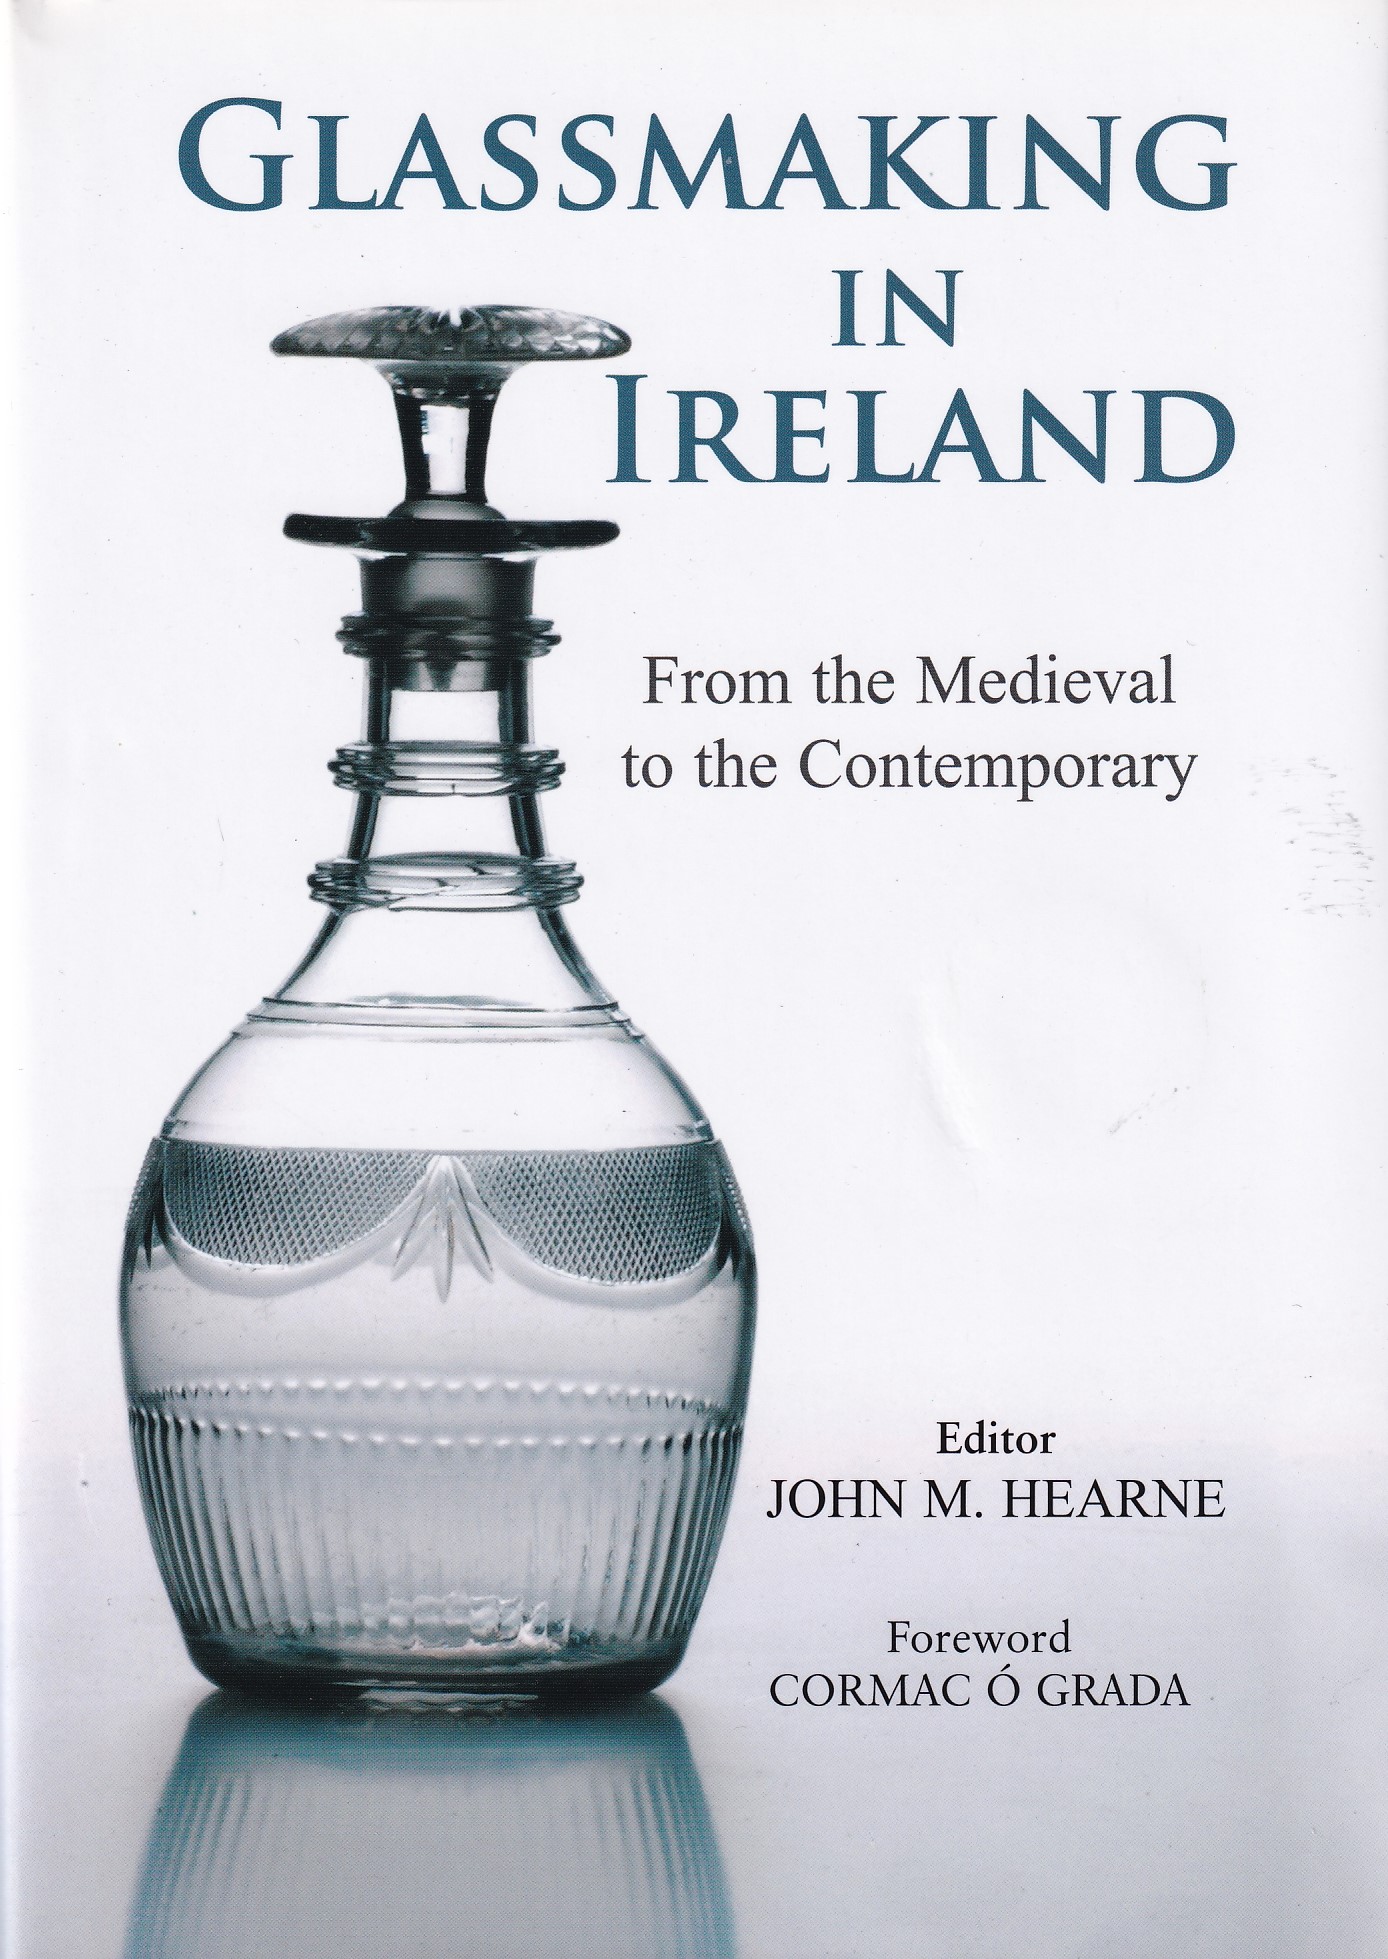 Glassmaking in Ireland: From the Medieval to the Contemporary by John M. Hearne